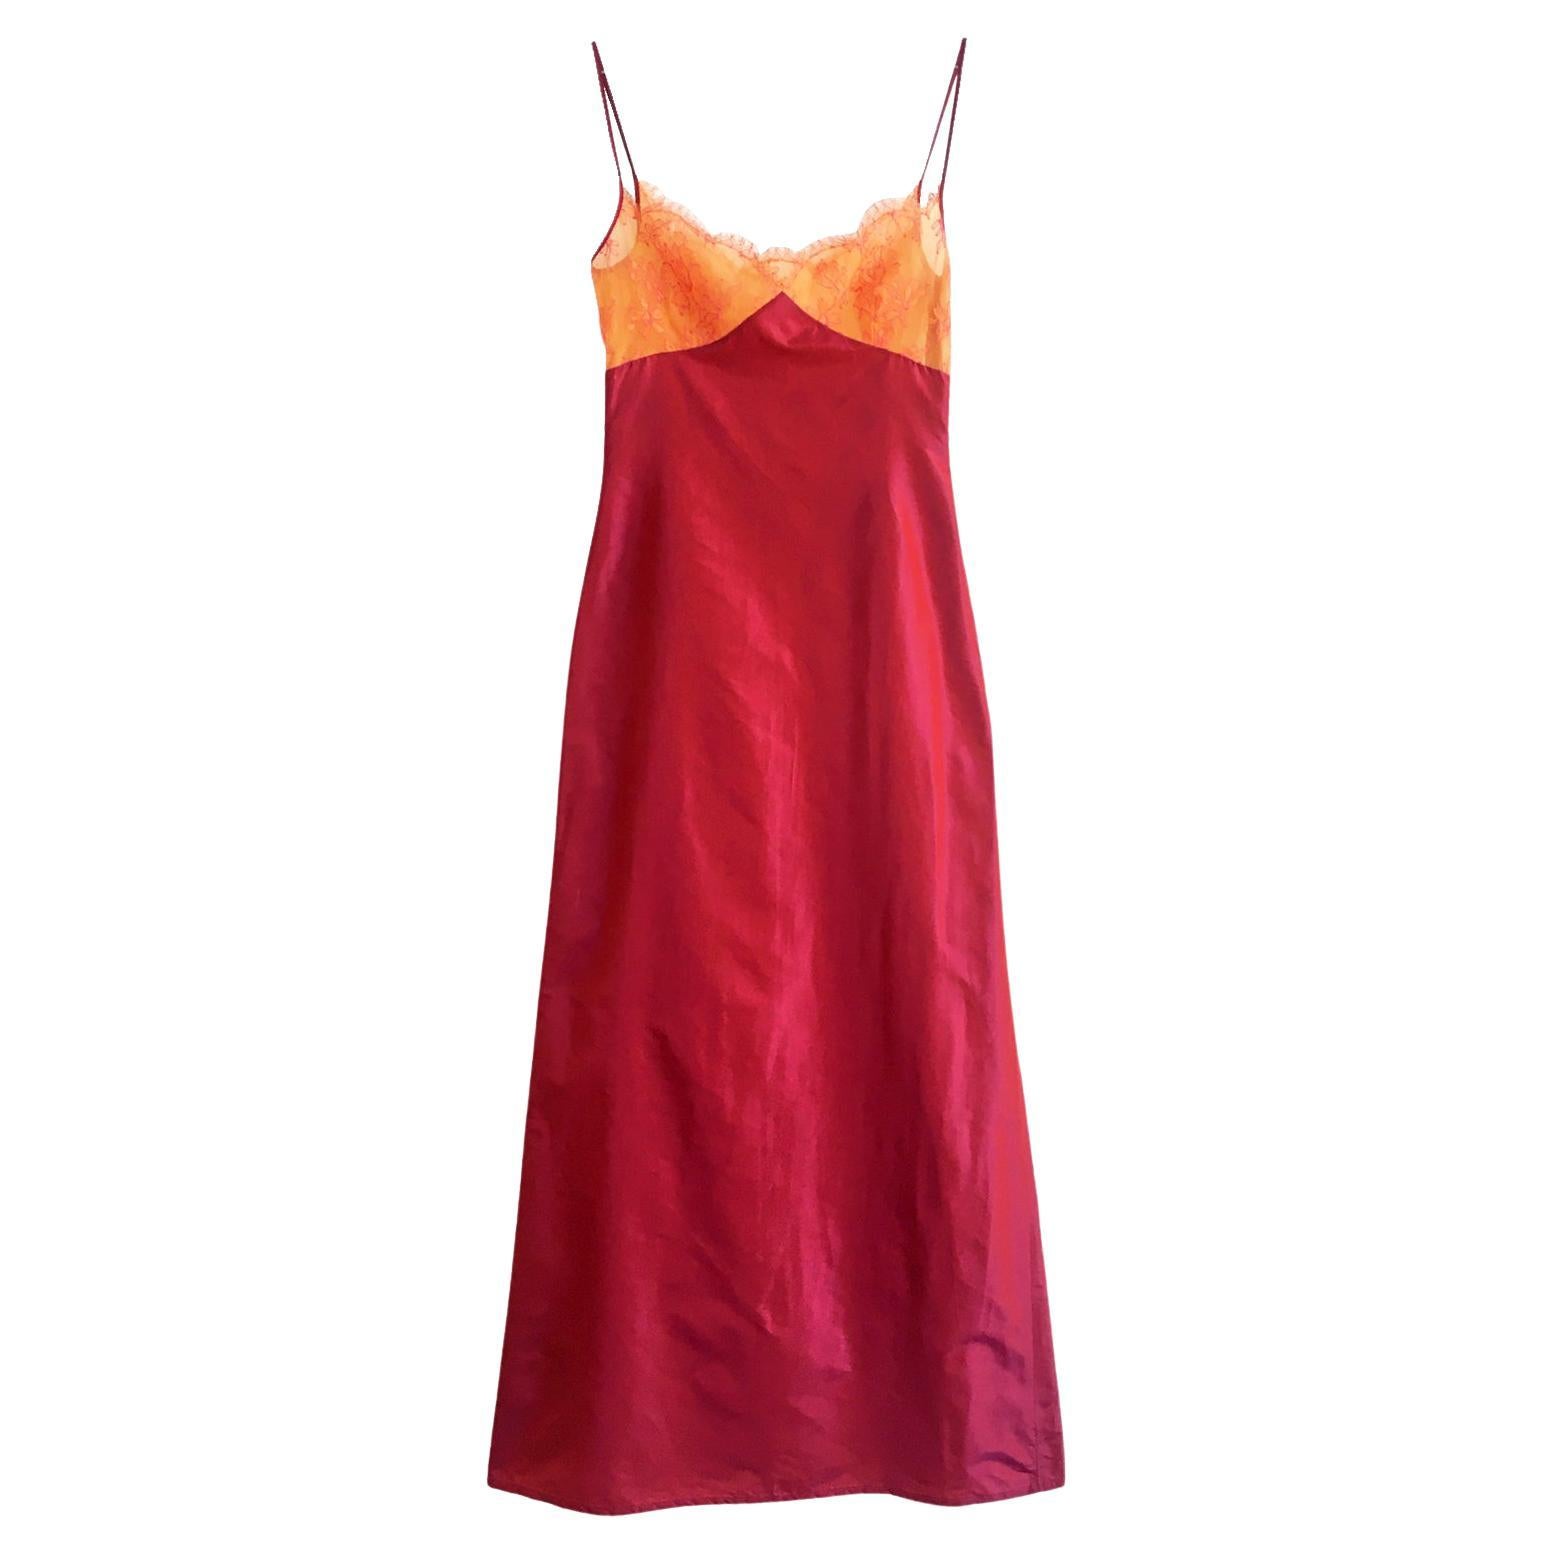 Emanuel Ungaro Collection Bicolour Strap Spaghetti Gown Dress NWOT For Sale